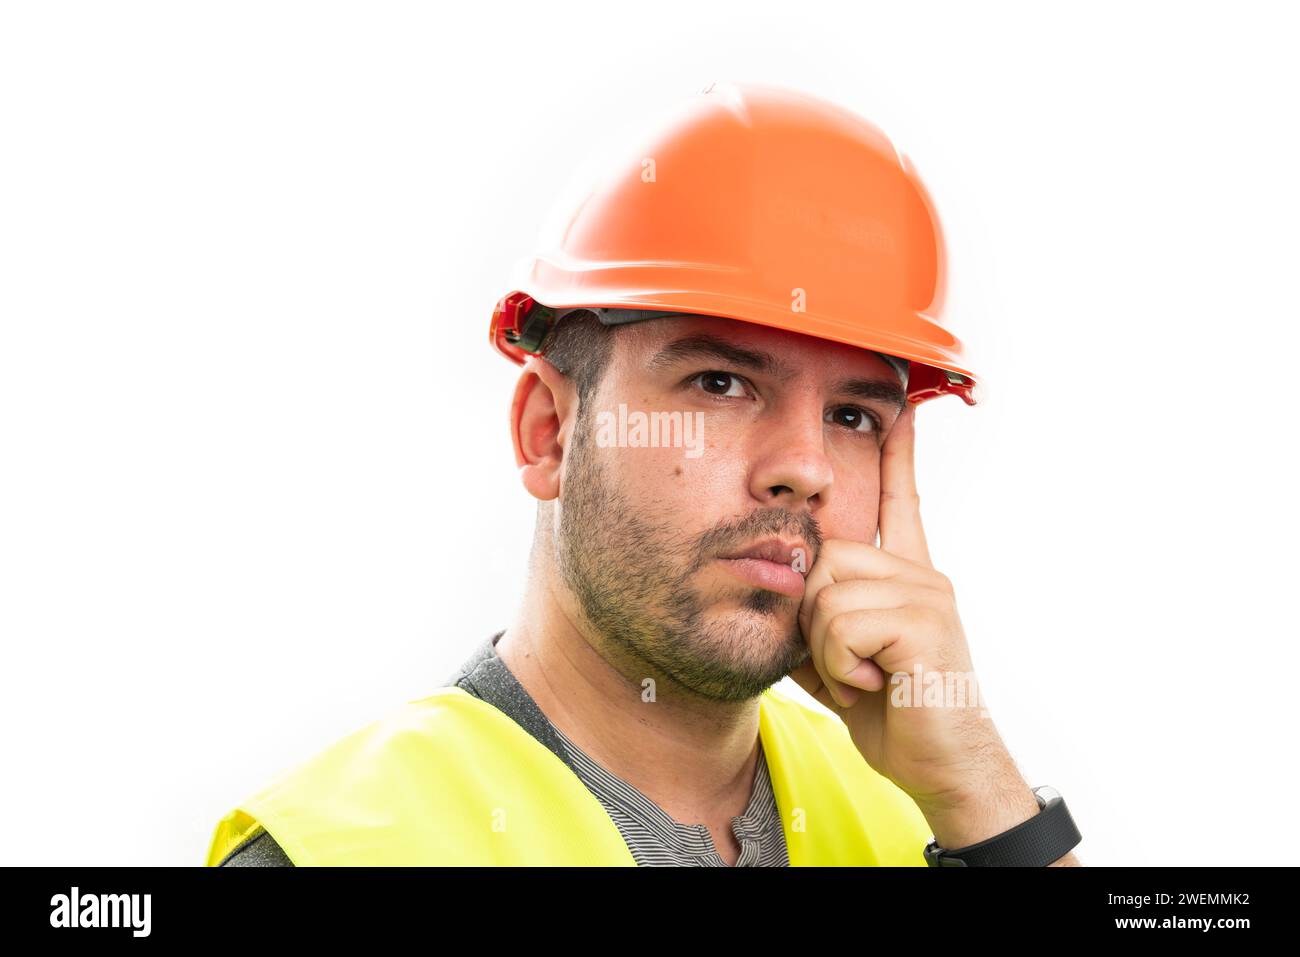 Close-up of serious adult male builder making thinking considering gesture with index finger touching temple wearing vest and orange safety helmet iso Stock Photo